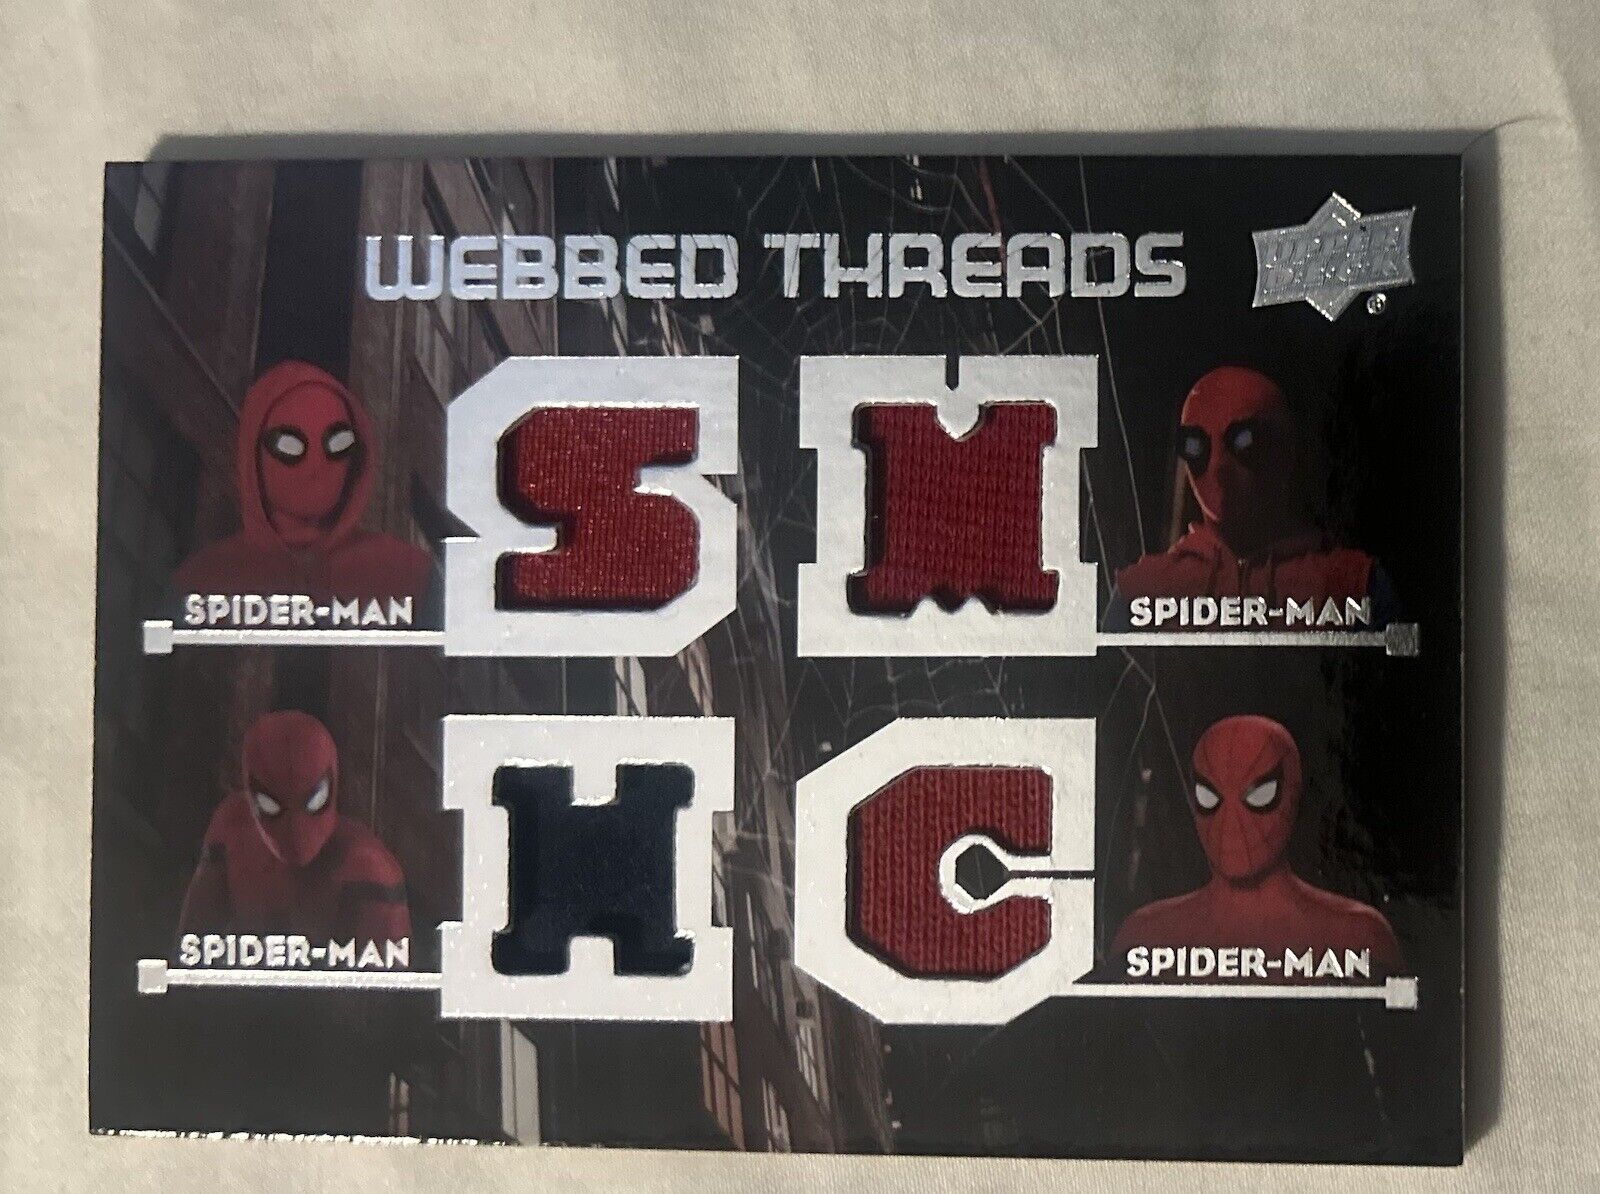 2017 UD Marvel Spider-Man Homecoming Webbed Threads Spider-Man Quad Relic